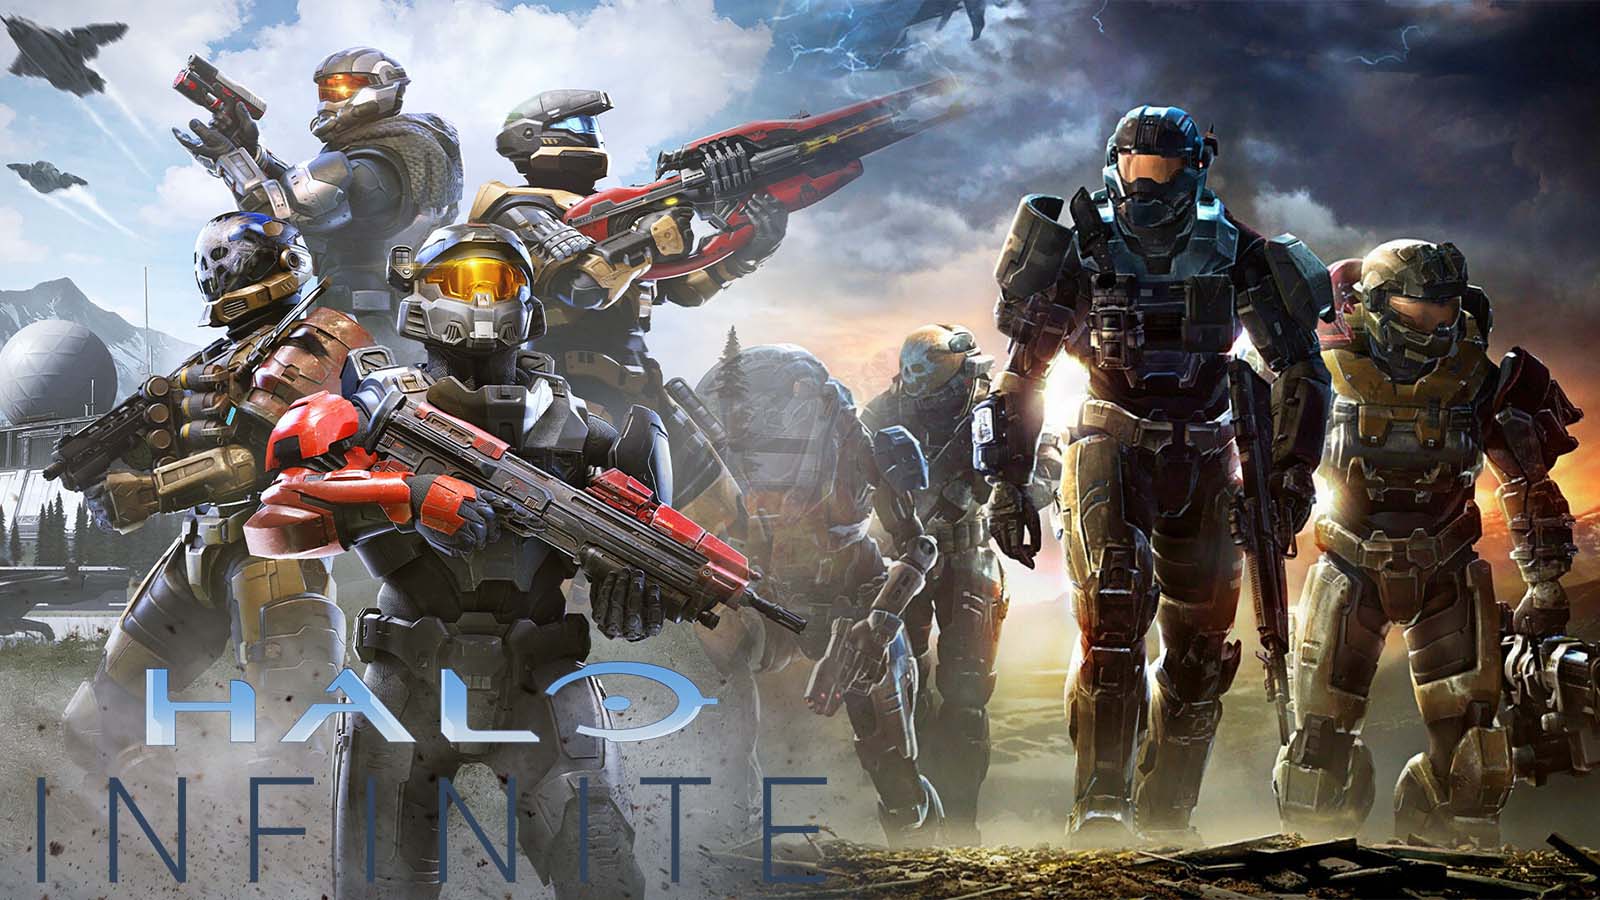 Halo Infinite and Halo Reach covers